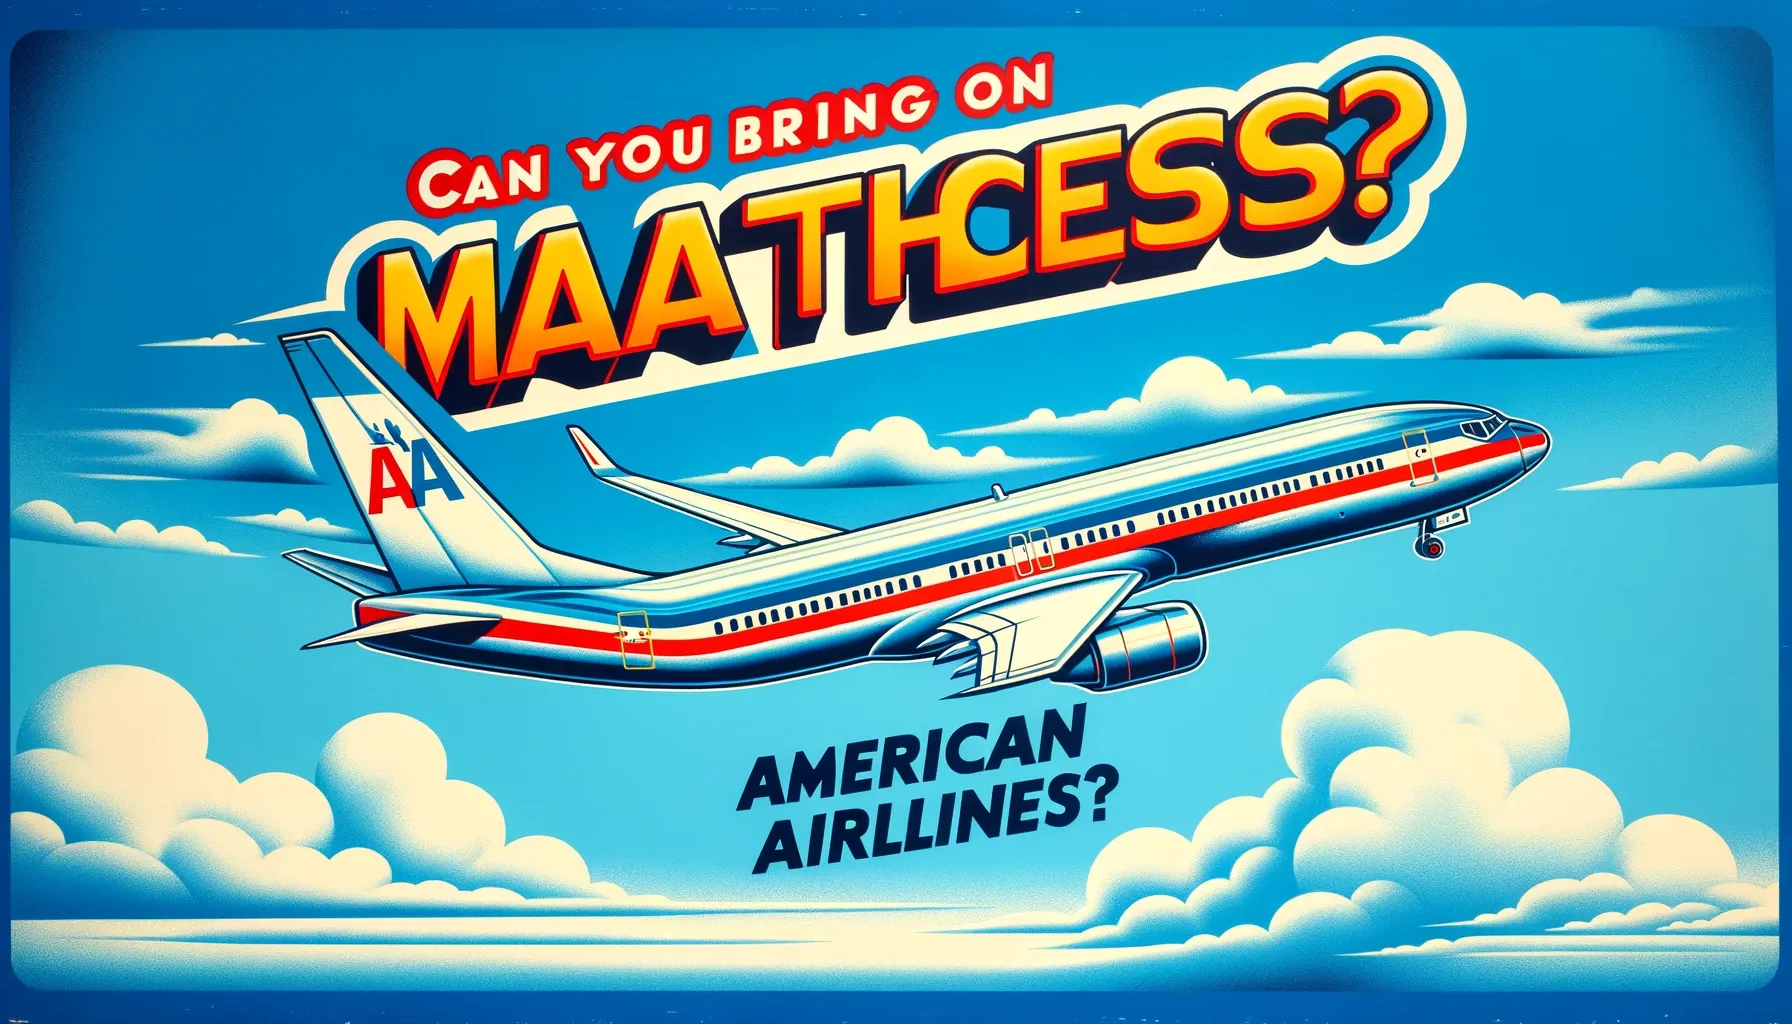 Can You Bring Matches on a Plane with American Airlines? TSA Rules